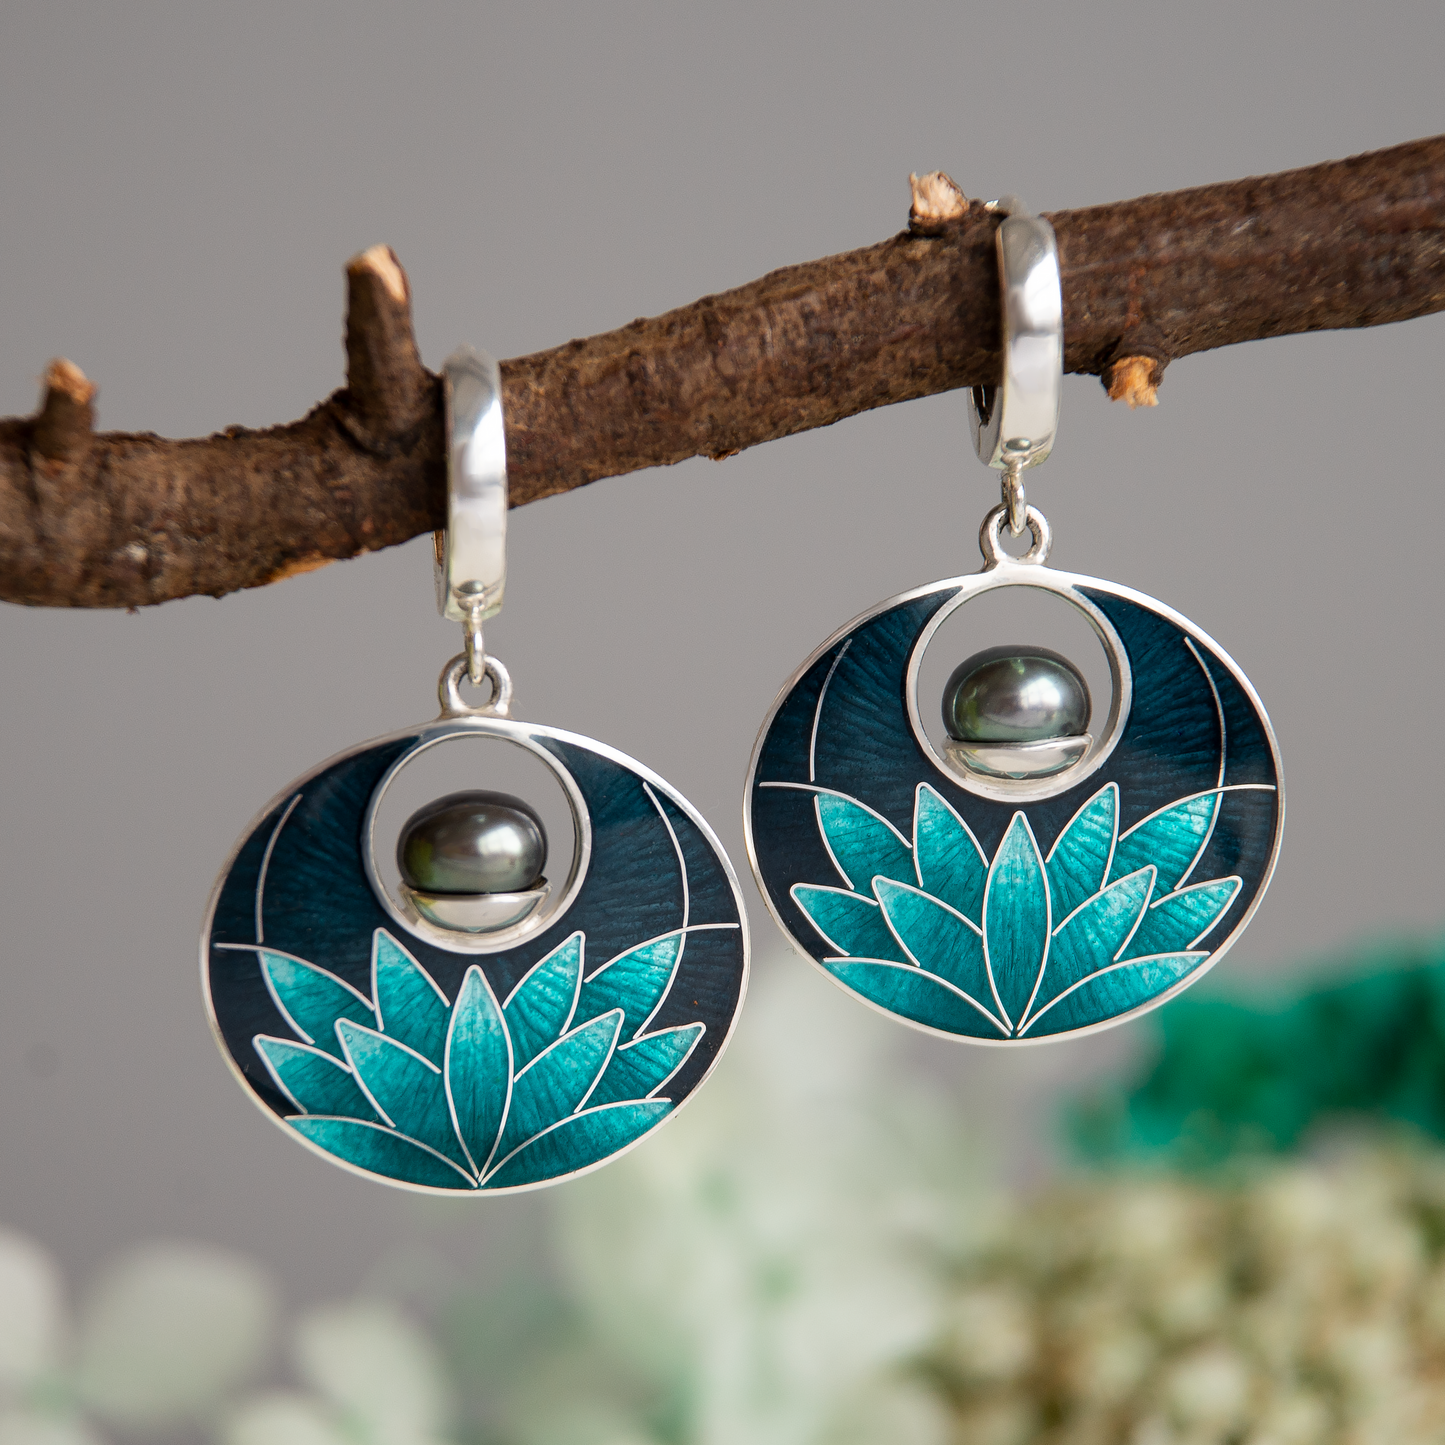 Cloisonné Enamel Black Turquoise Lily Earrings With Peacock Pearls